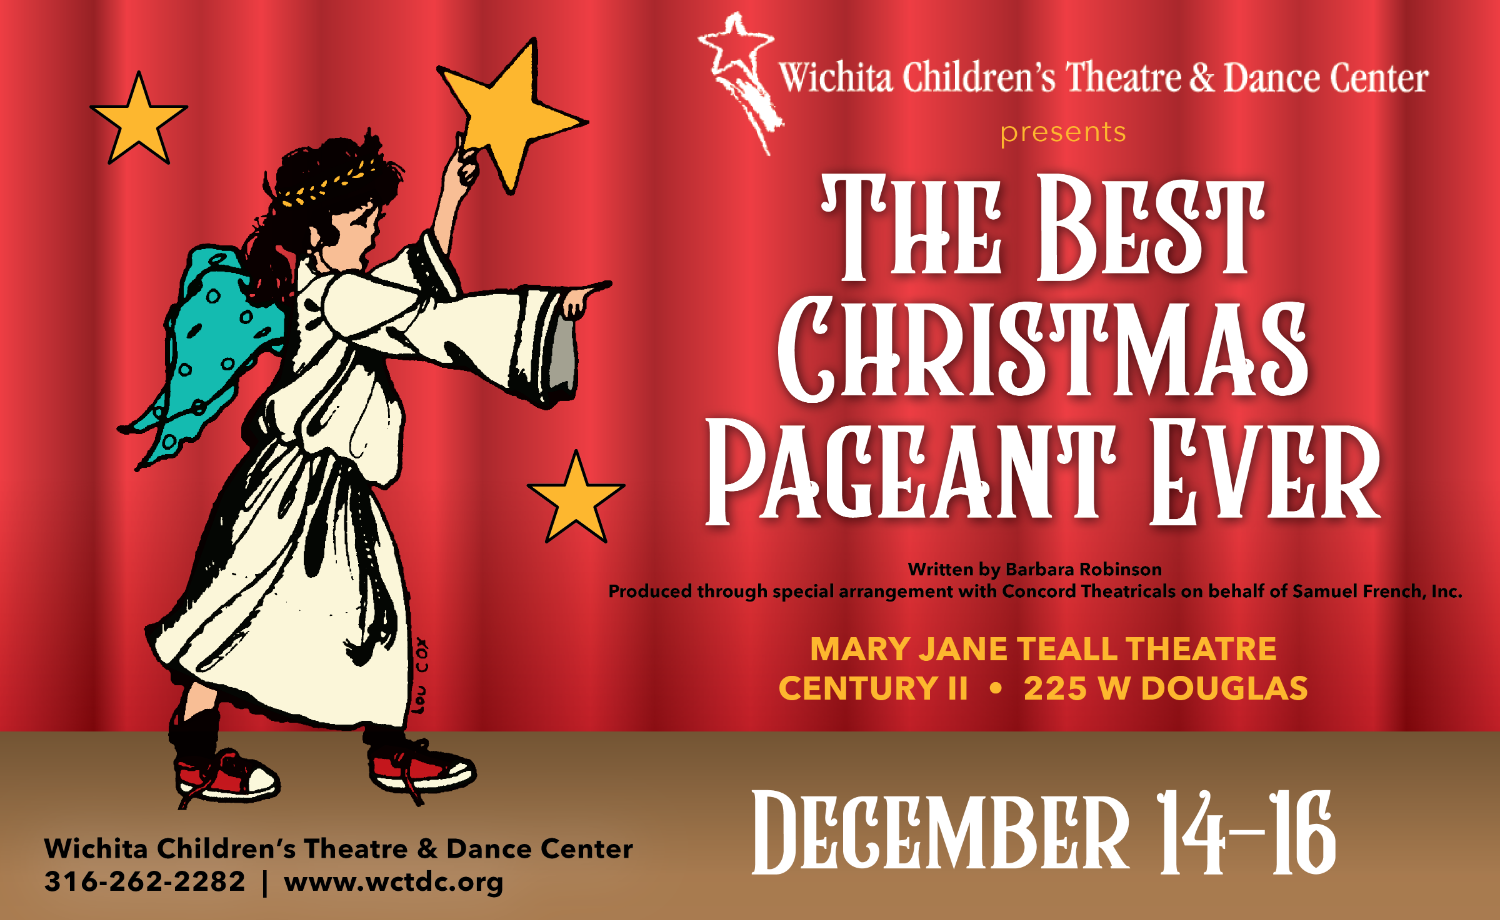 The Best Christmas Pageant Ever Dec 14-16